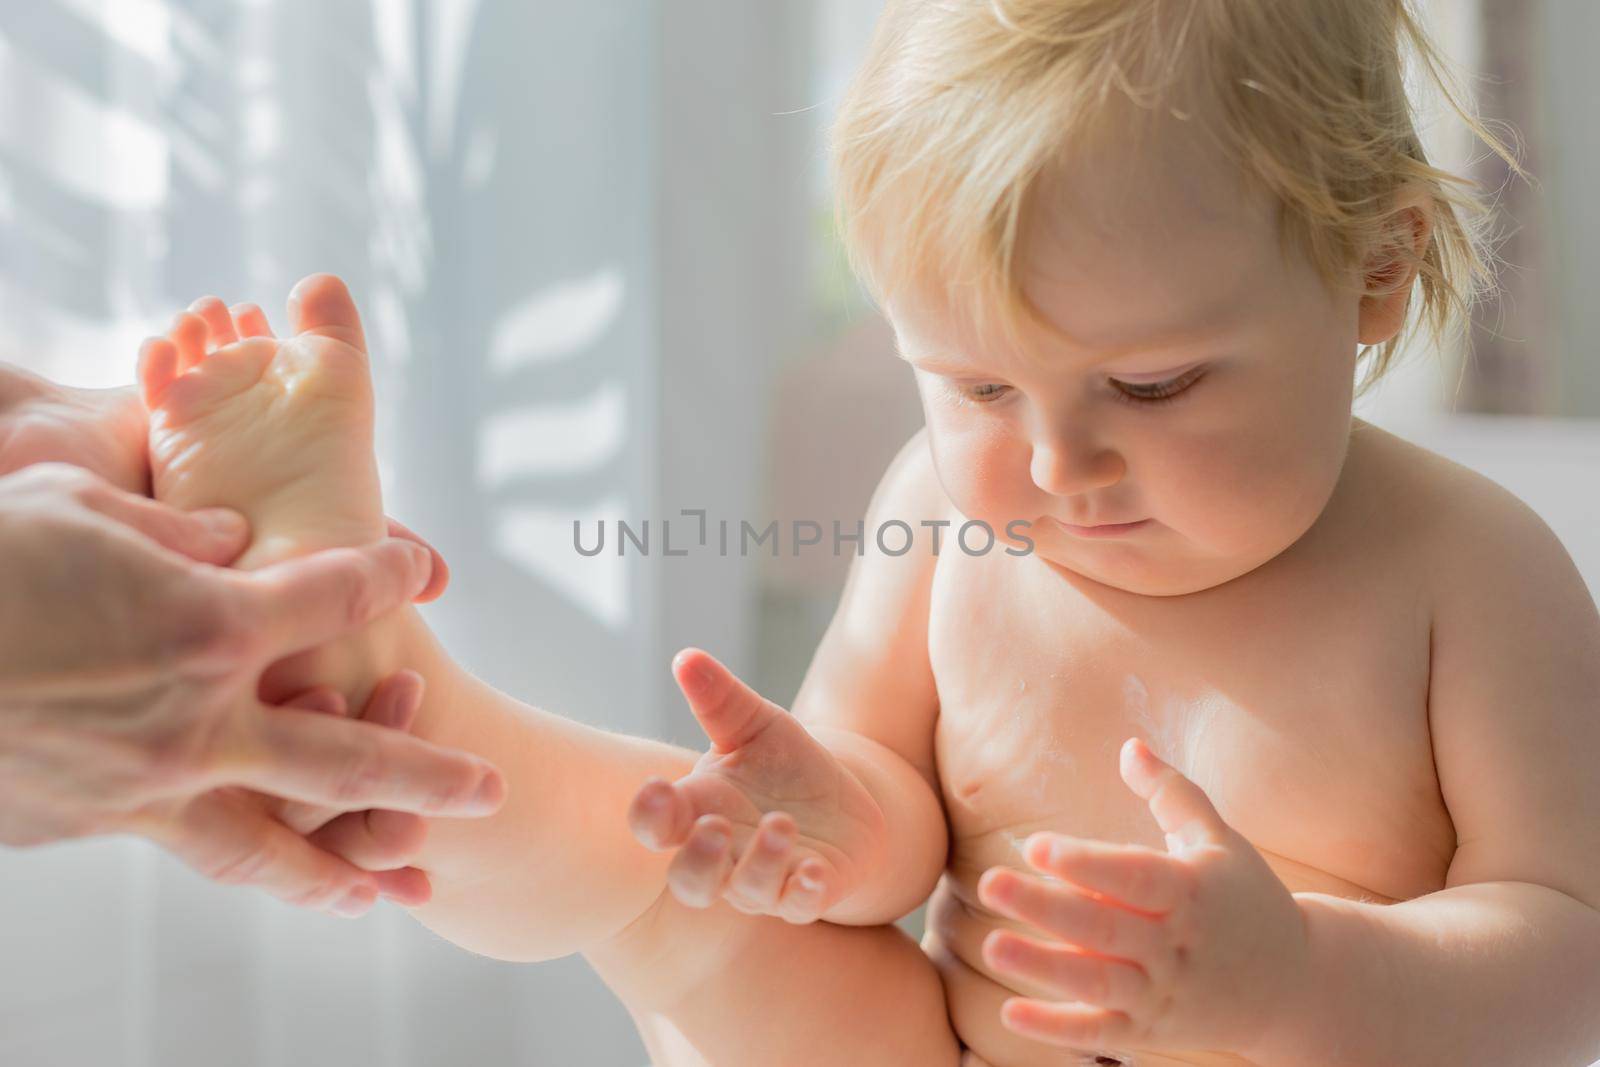 Mom gives her baby a leg and foot massage. Close-up. A satisfied baby is sitting on a massage table.